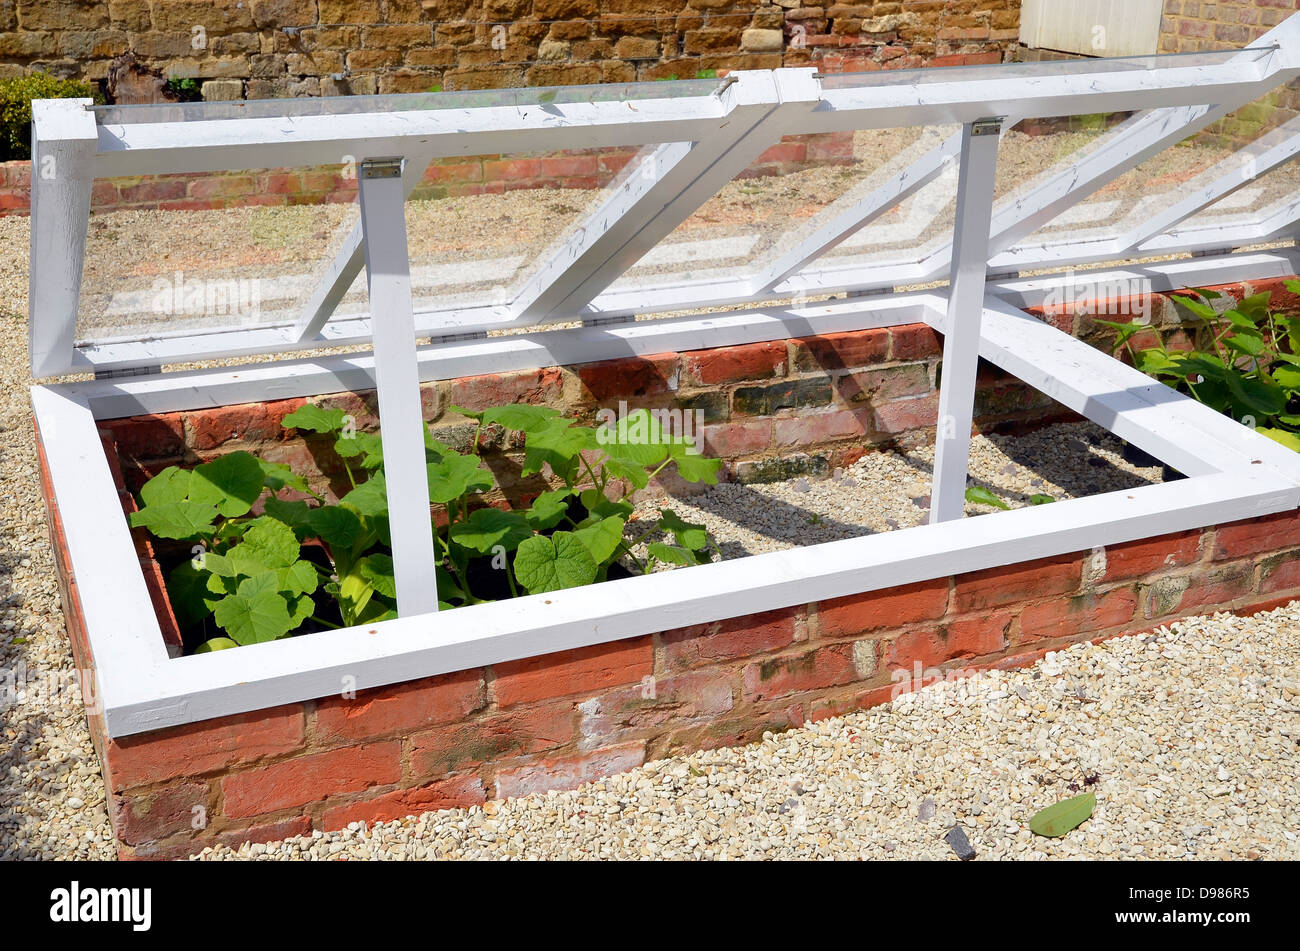 A cold frame used to protect and harden off tender plants  in an English garden. Stock Photo